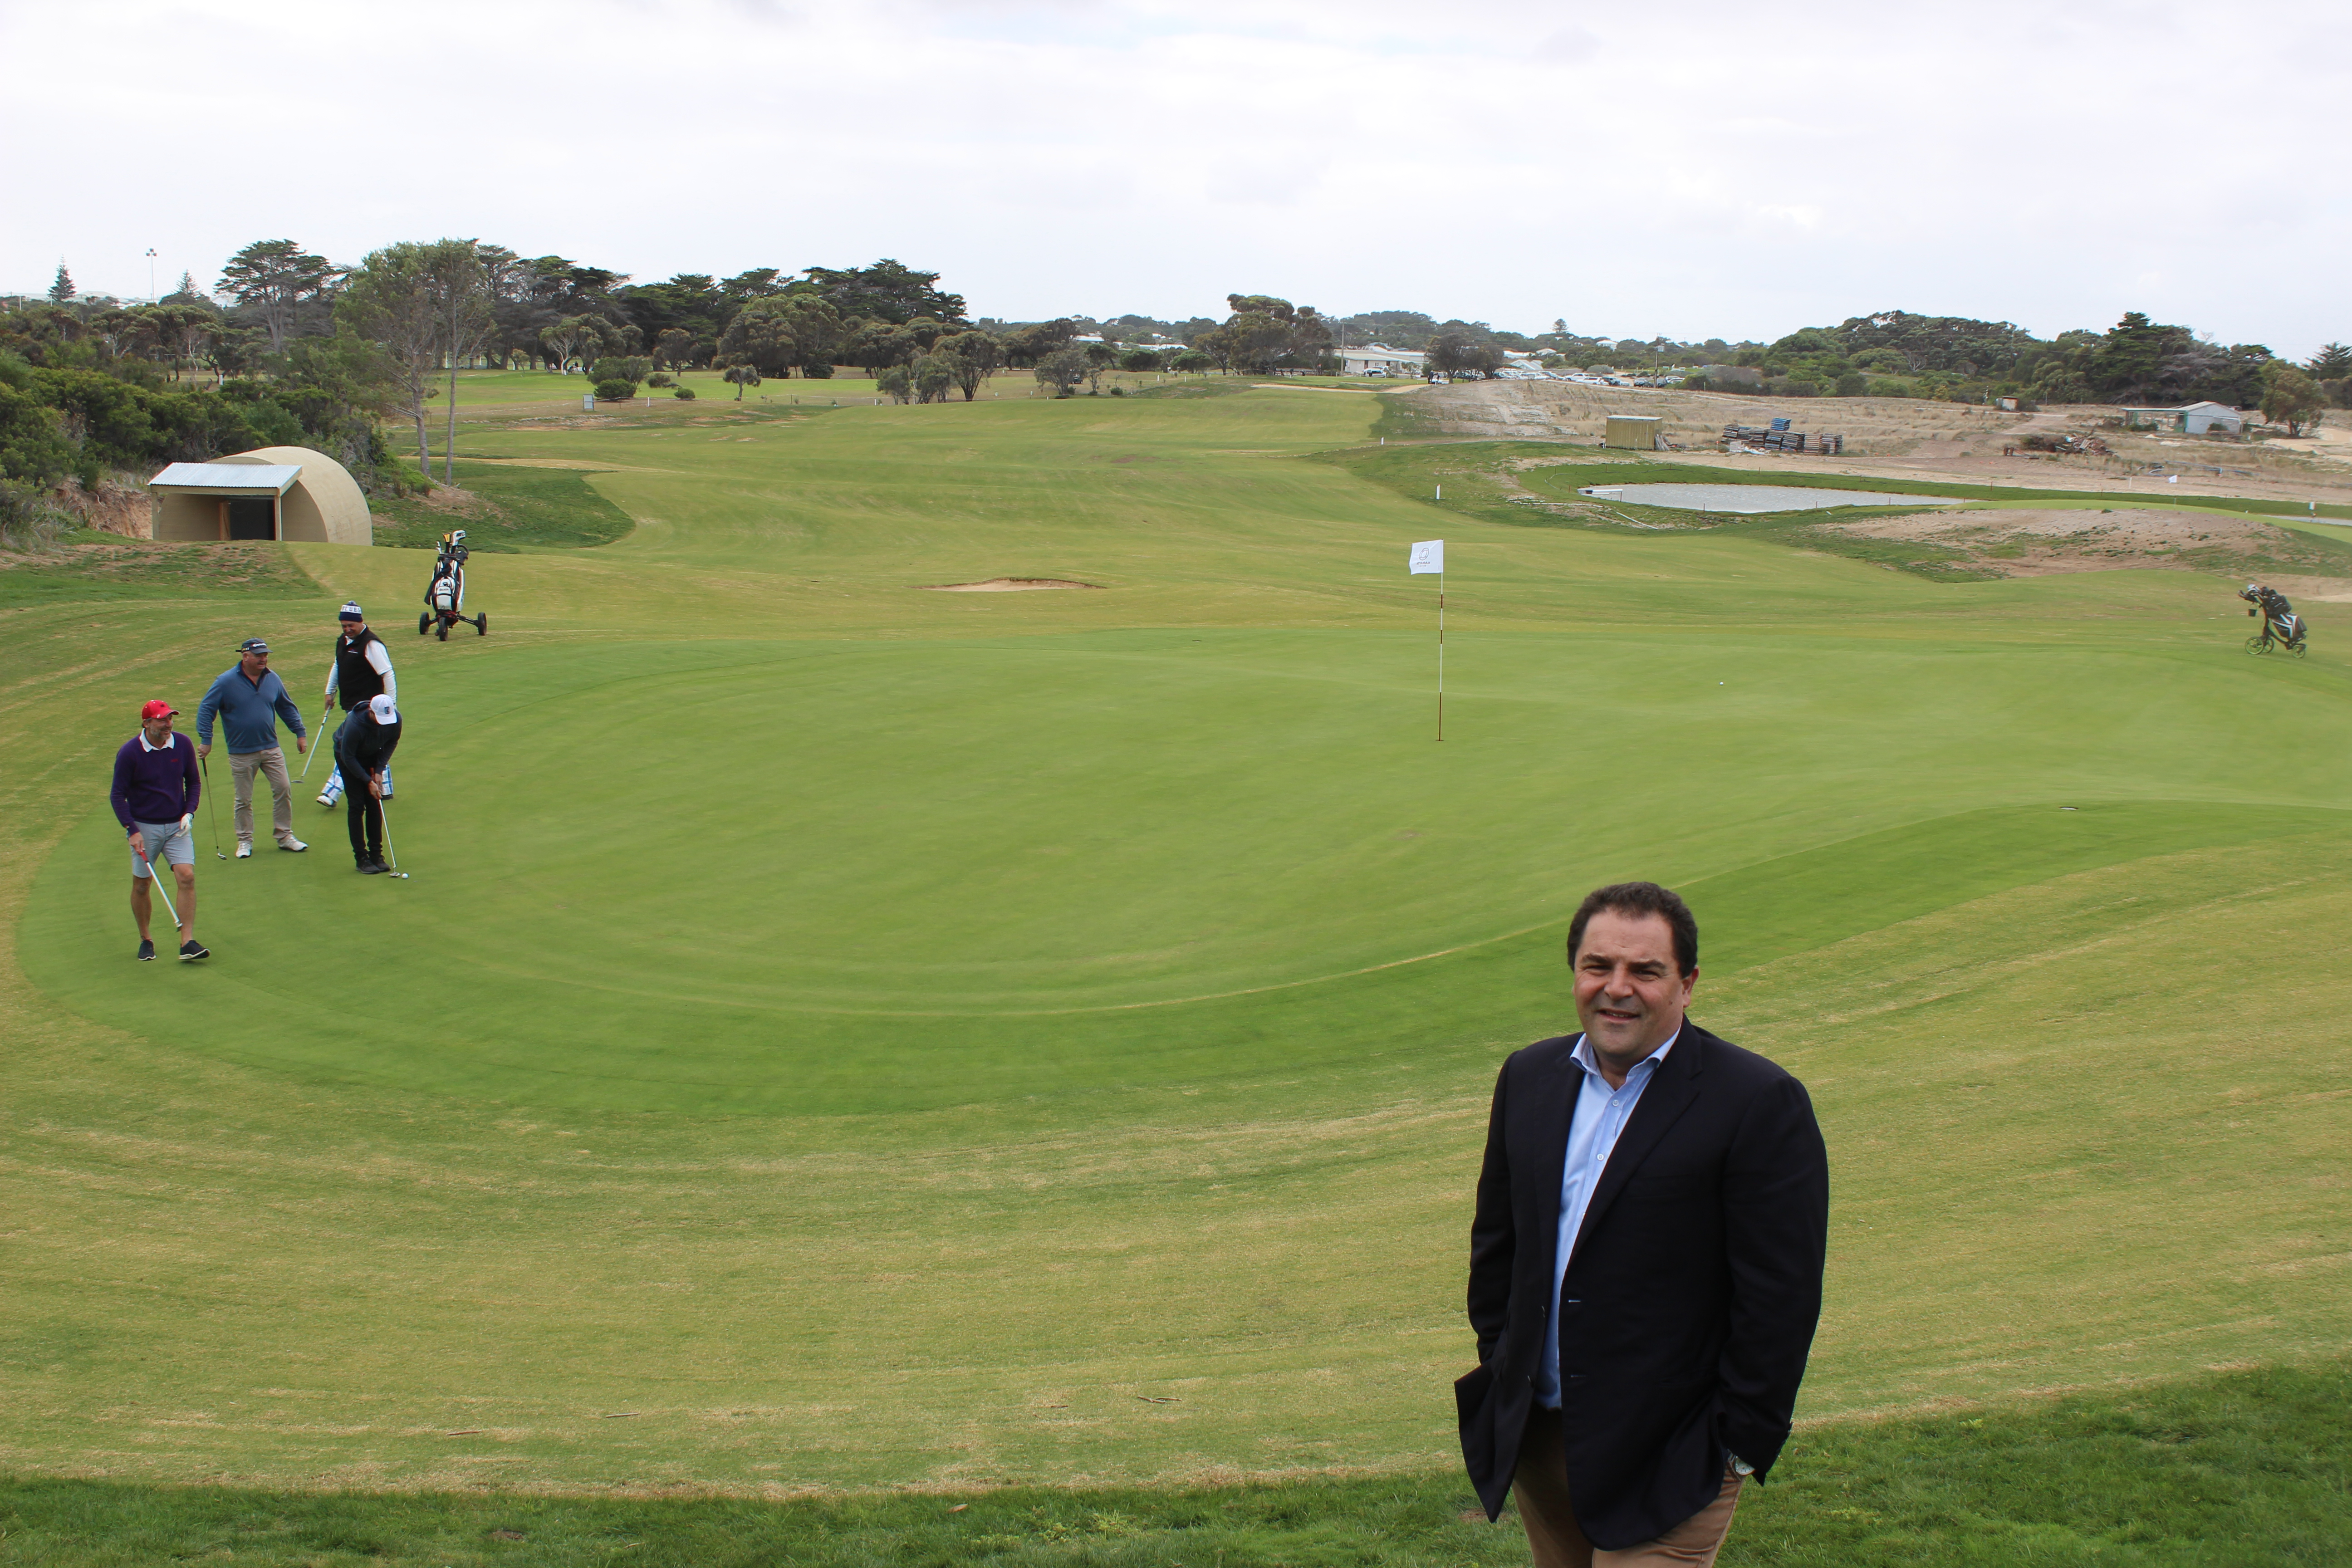 PASIN TEES OFF AT EXPANDED ROBE GOLF COURSE